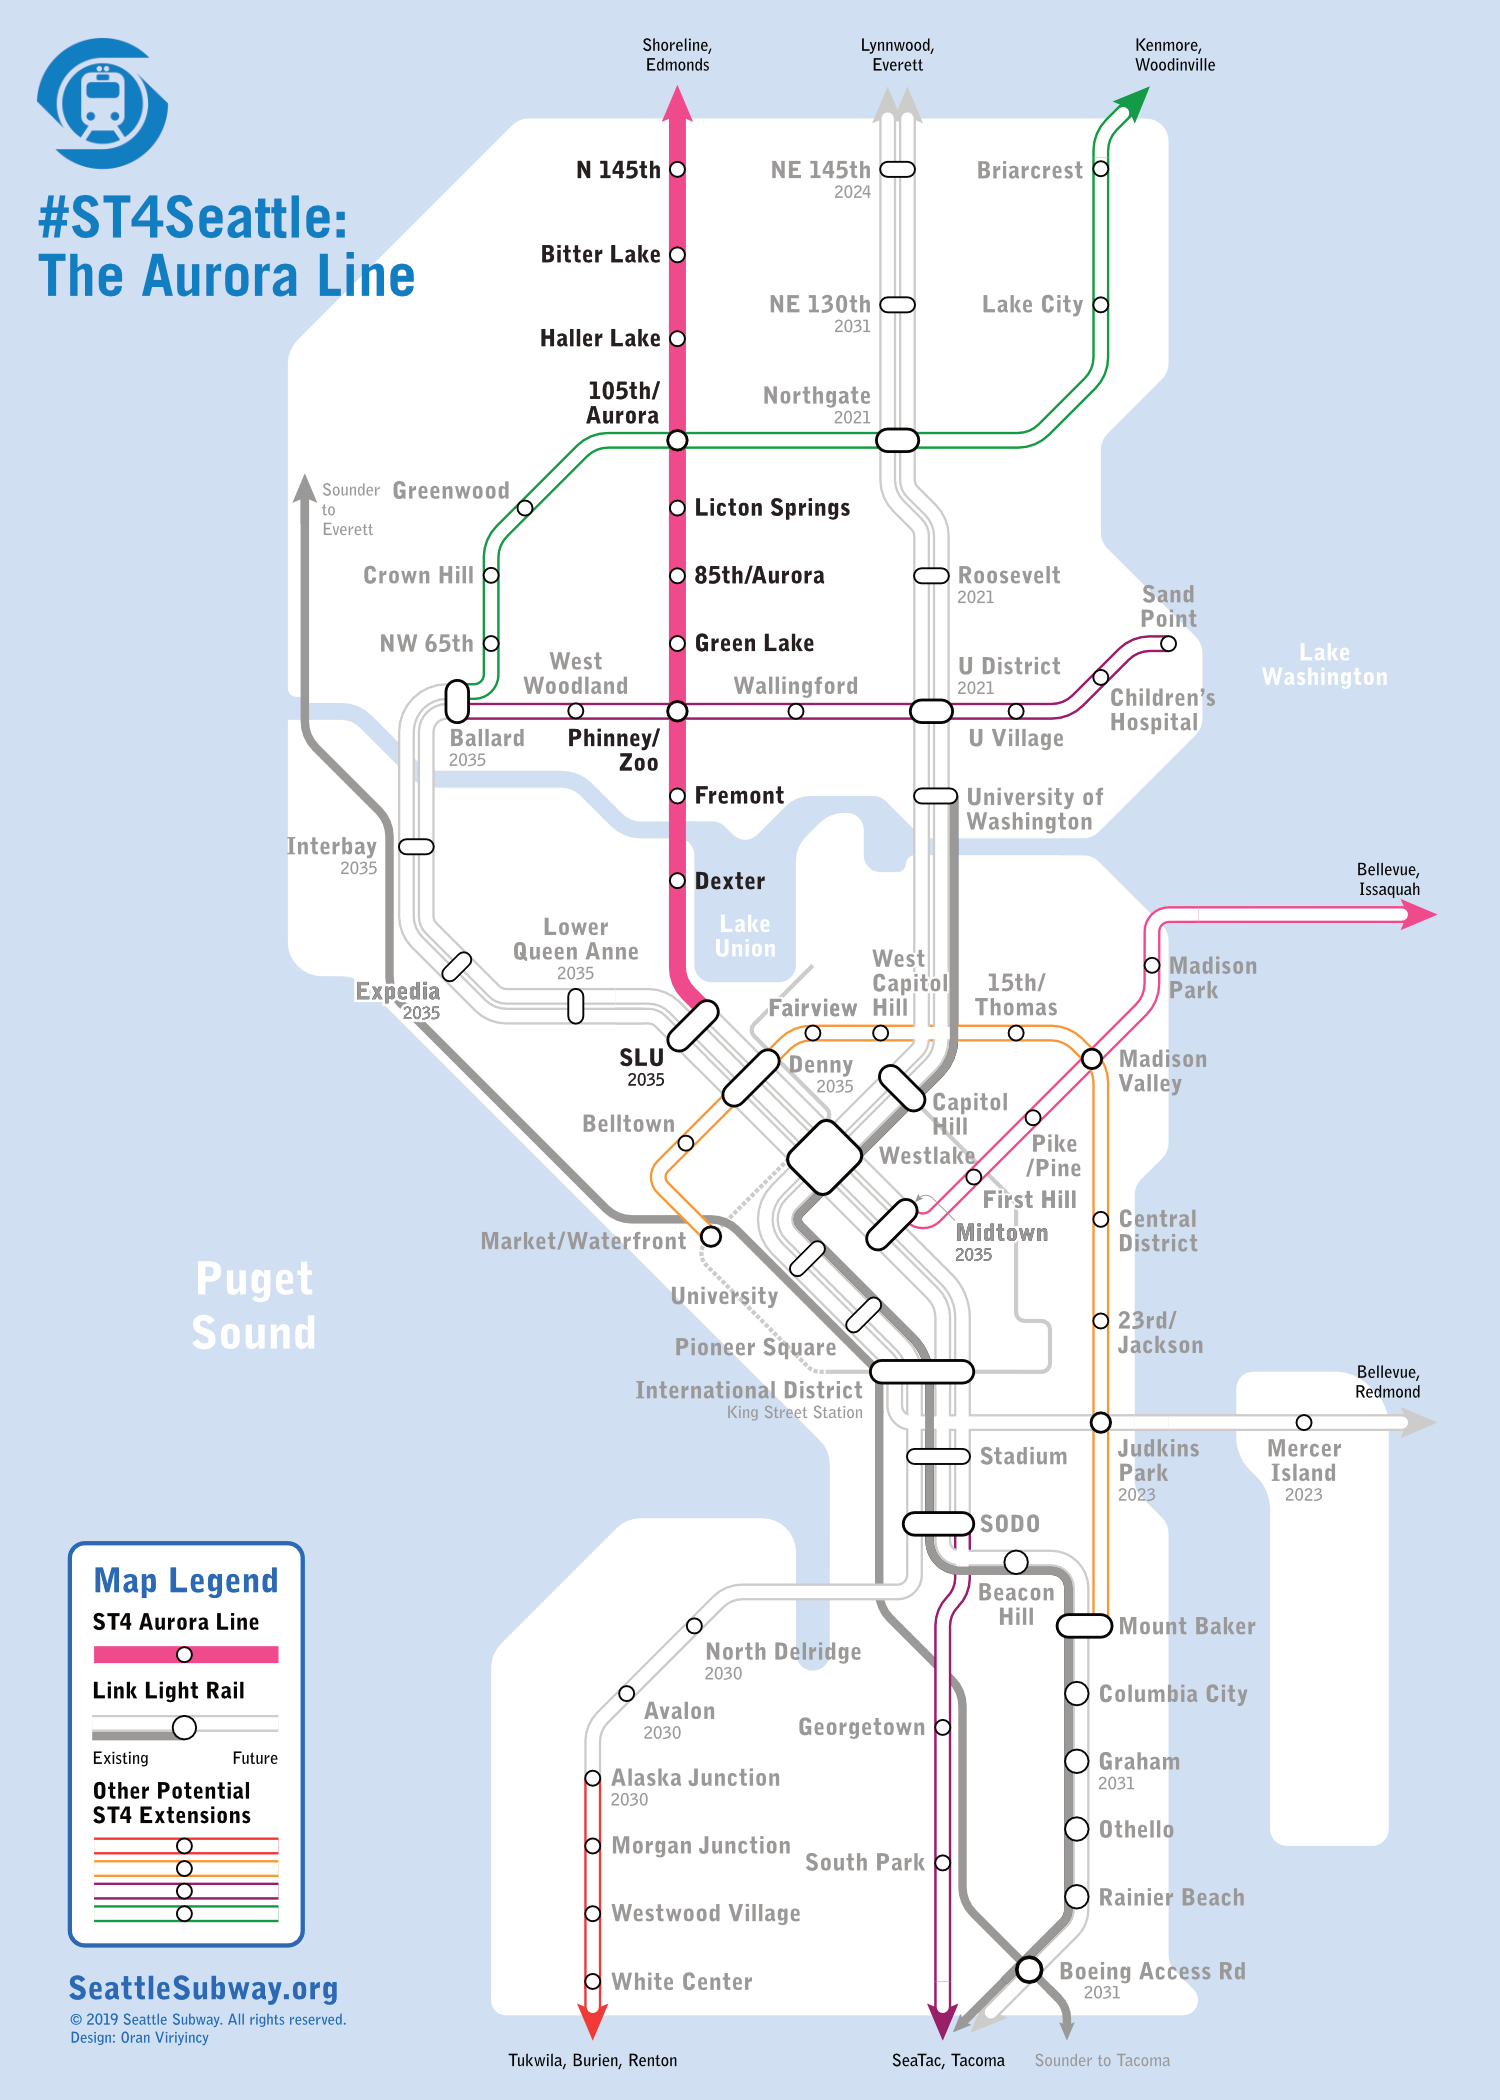 Seattle redesigns public transit map with focus on frequency – GeekWire